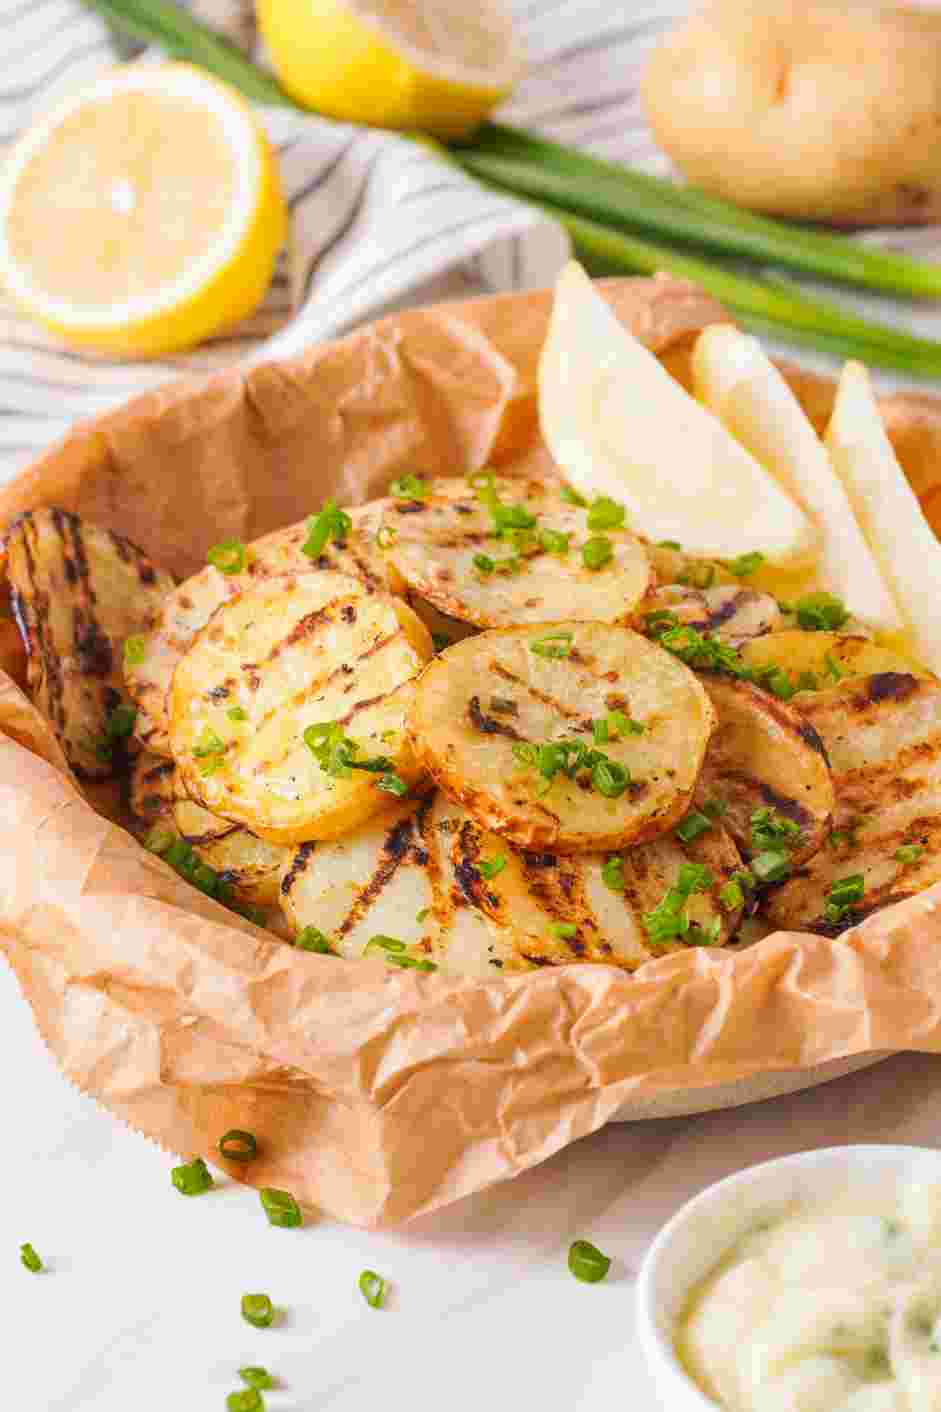 Grilled Potatoes Recipe: Plate and garnish with more chives.